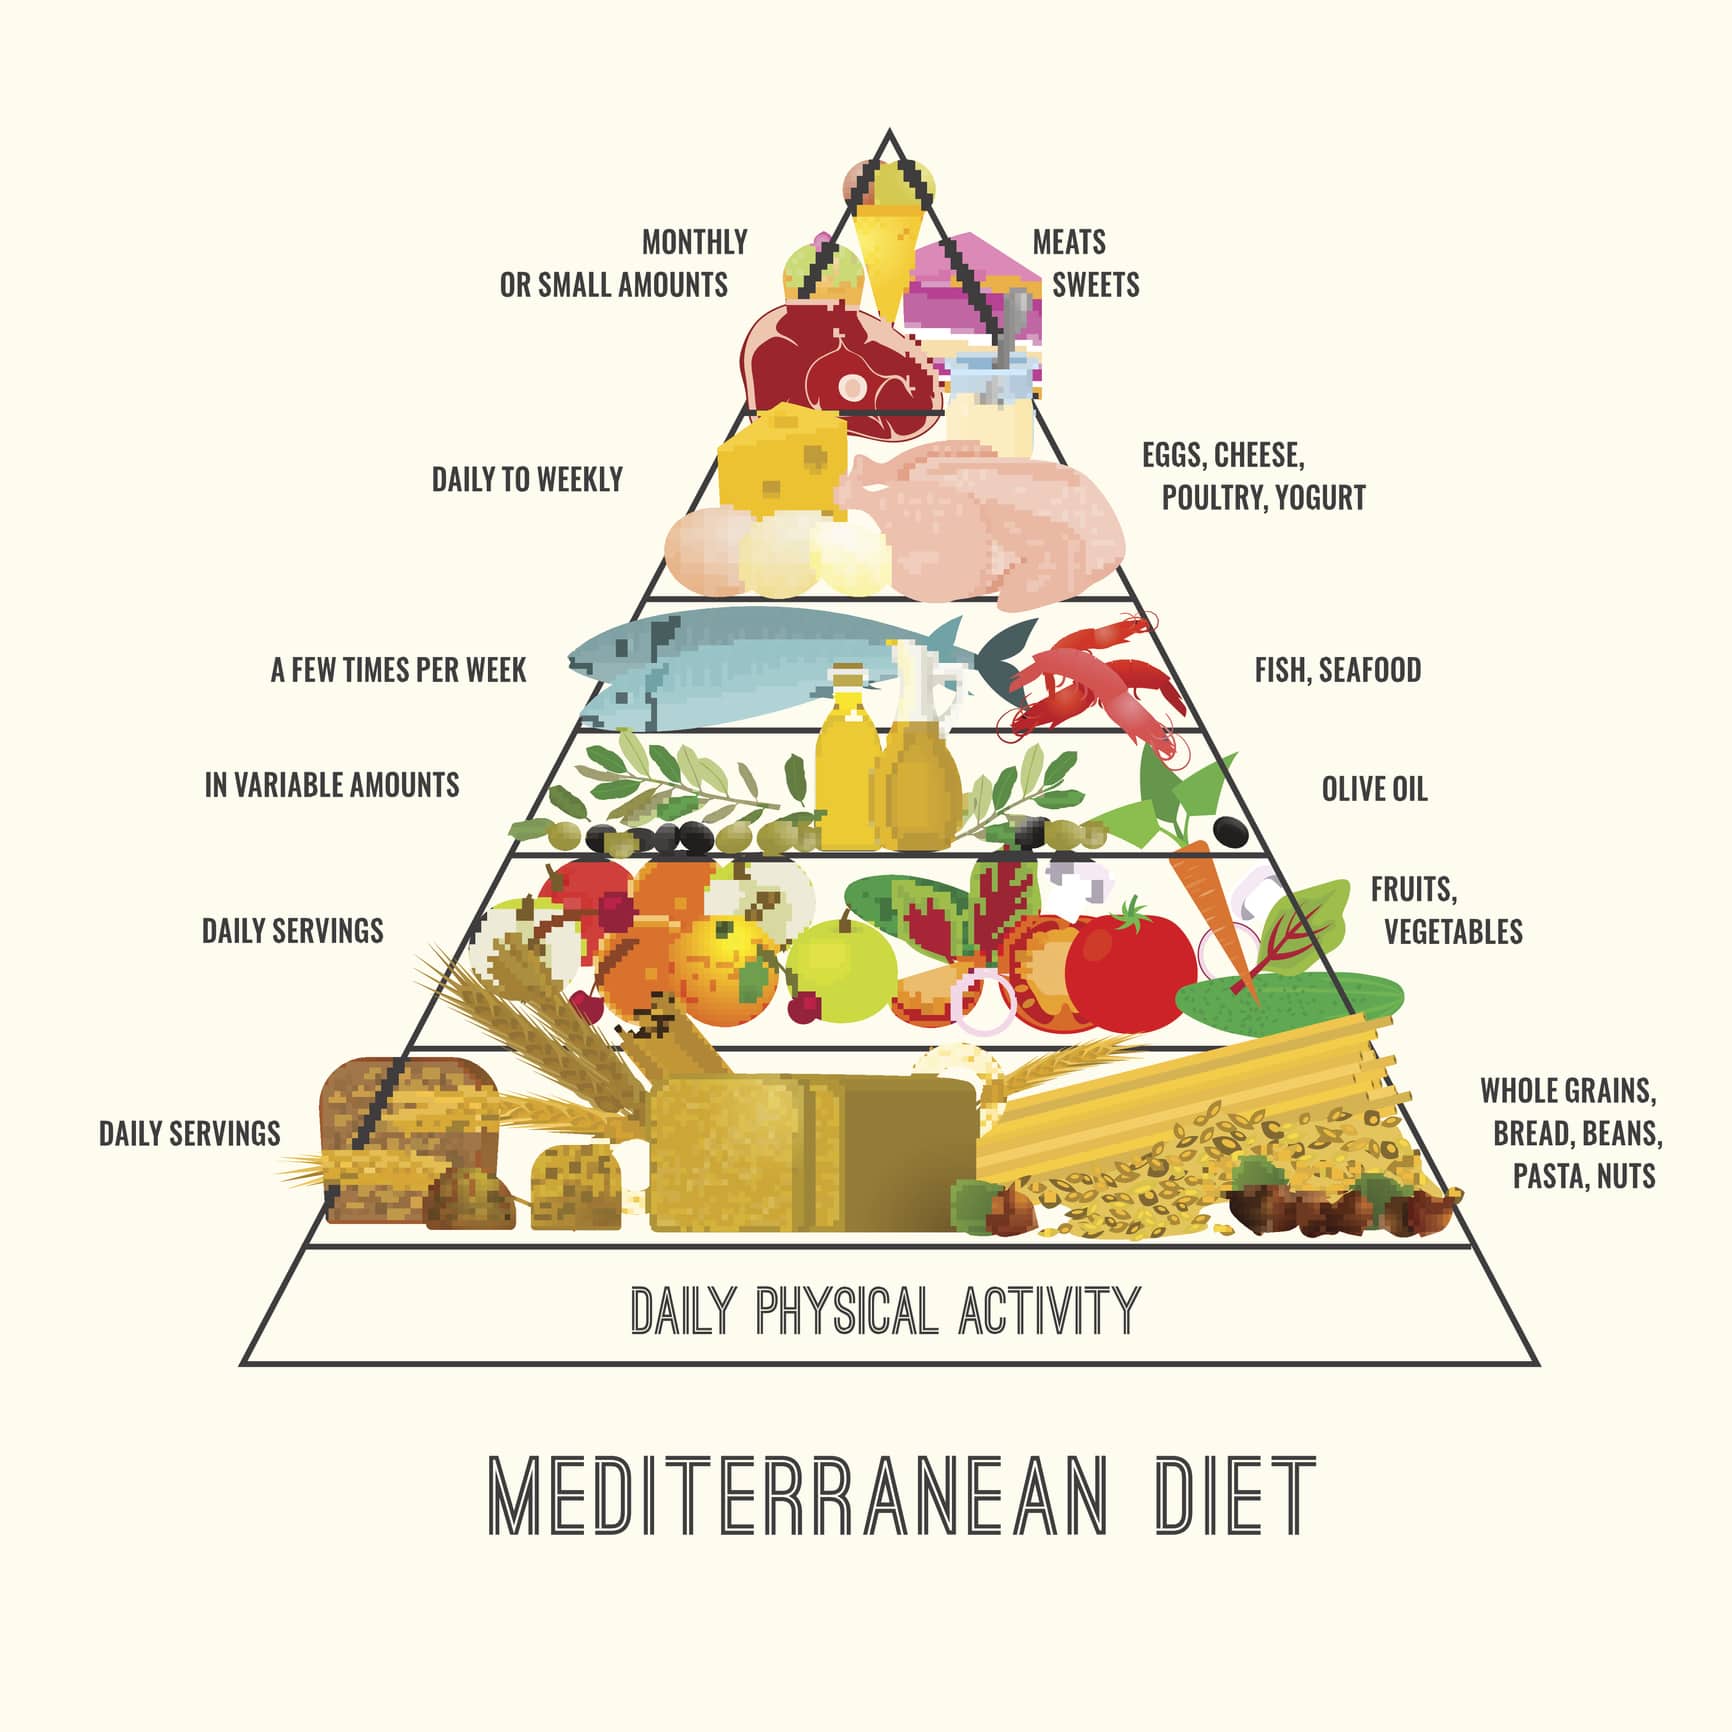 Beautiful Vector Mediterranean Diet image in a modern authentic style on a beige background. Useful graph for healthy life.